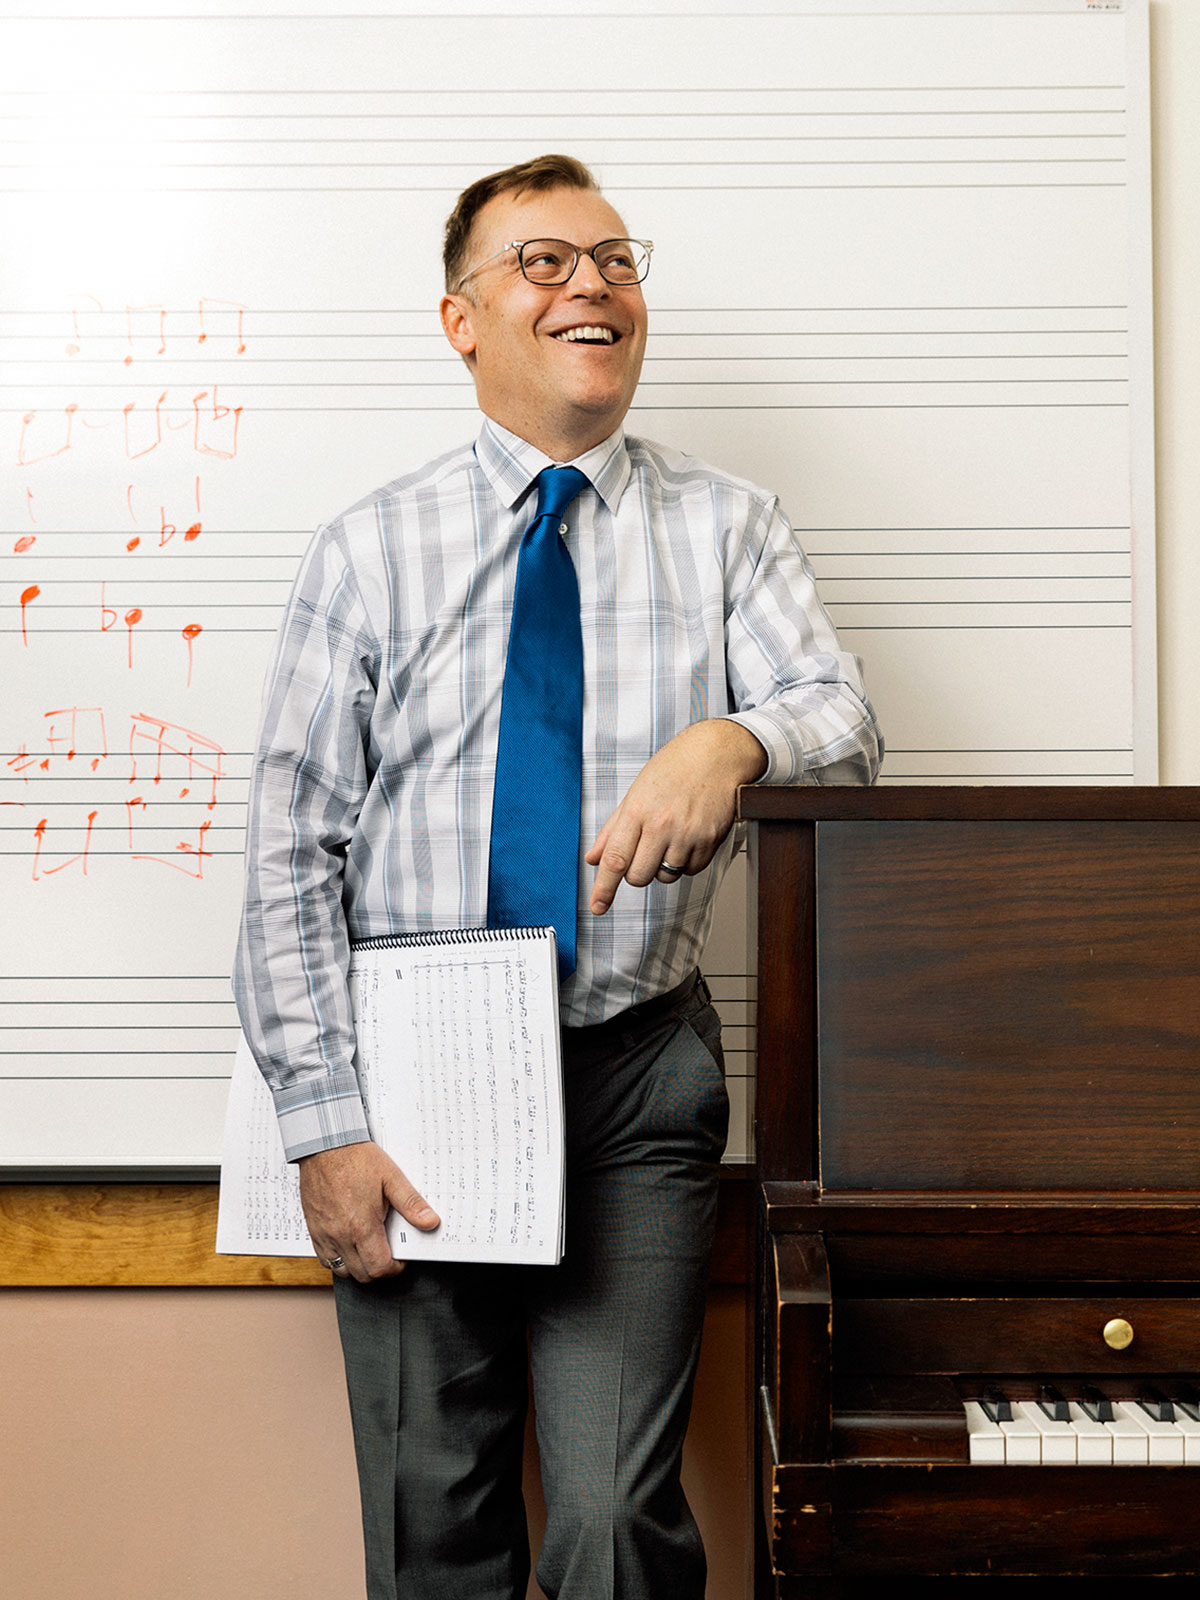 Jeffrey Nytch: Composer, educator and consultant and currently the Director of the Entrepreneurship Center for Music at The University of Colorado-Boulder. Boulder, CO. Member since 2009